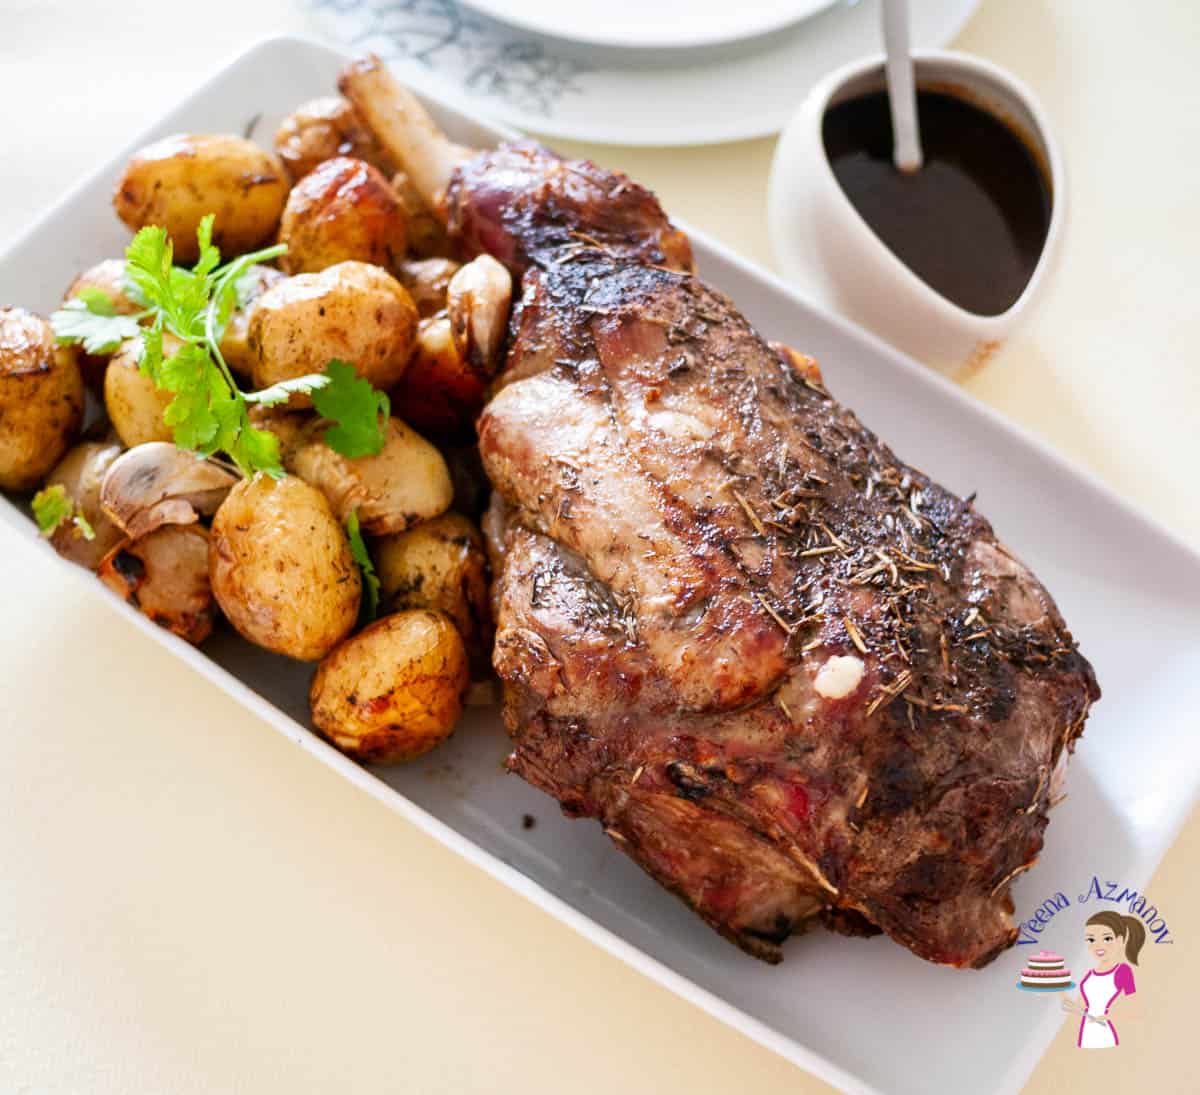 A roast leg of lamb with baked potatoes on a serving dish.